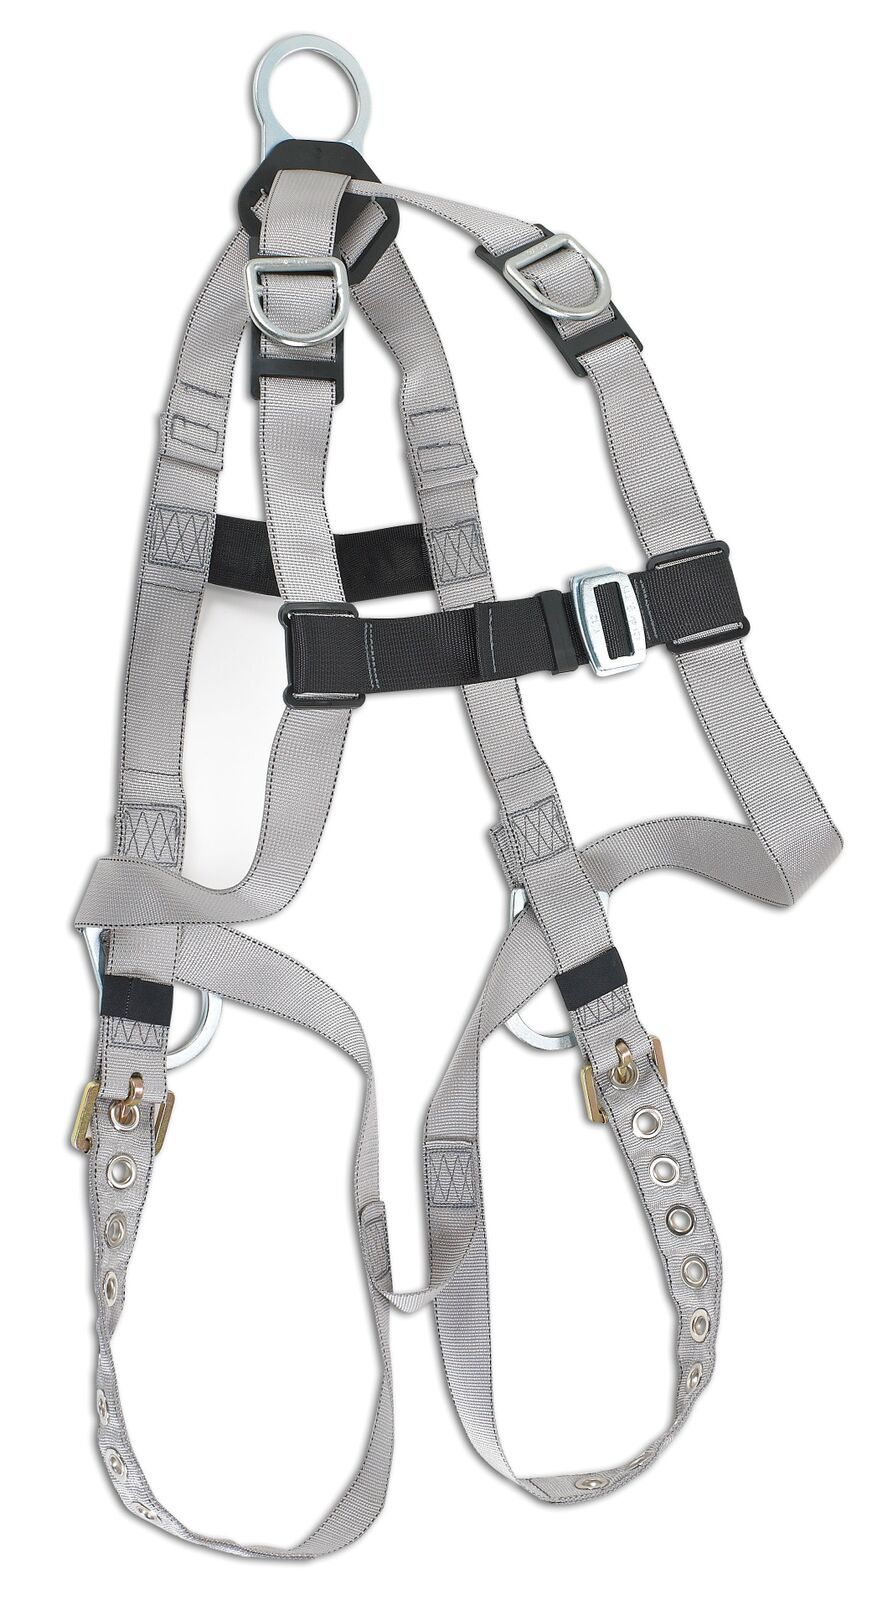 Dynamic B-Compliant Universal Harness Confined Space - Cleanflow